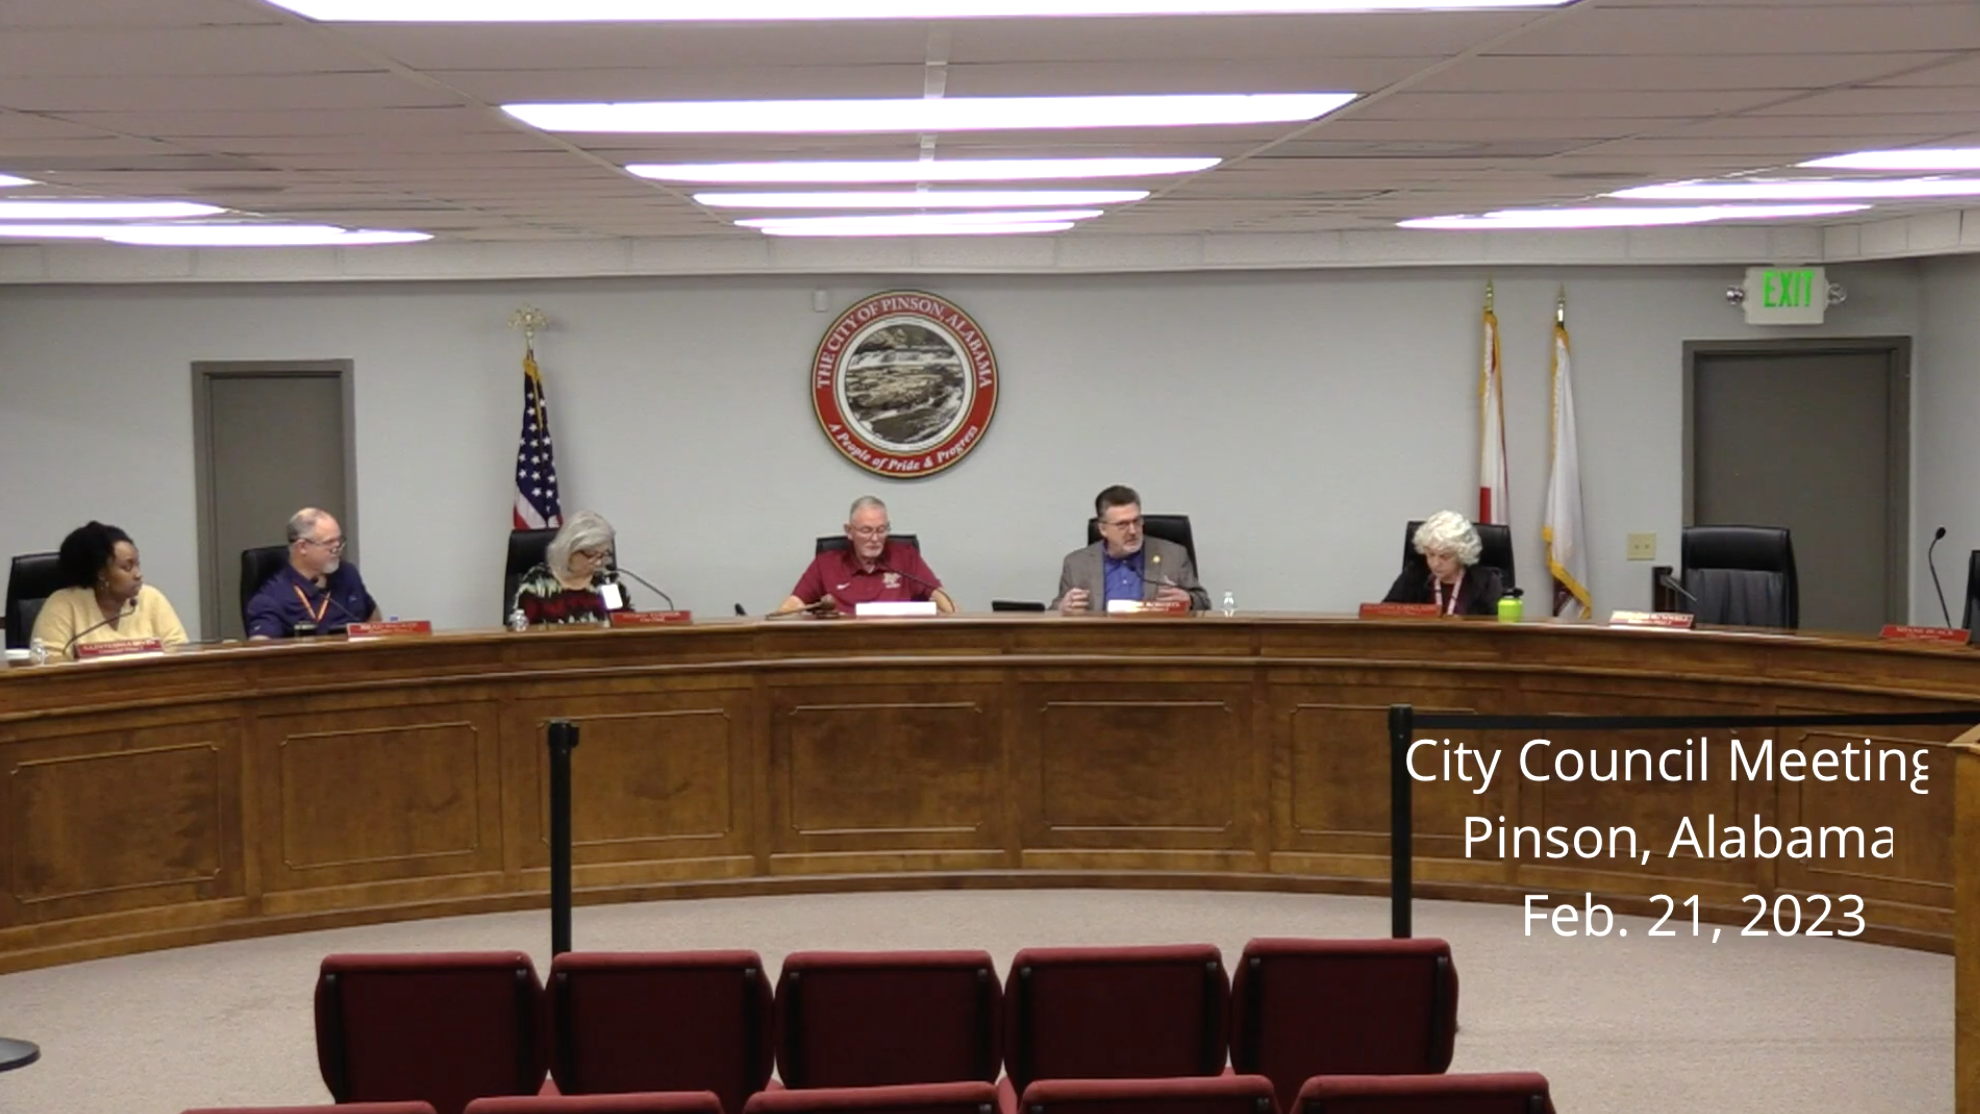 Pinson City Council discusses waste management services, disabled resident at meeting